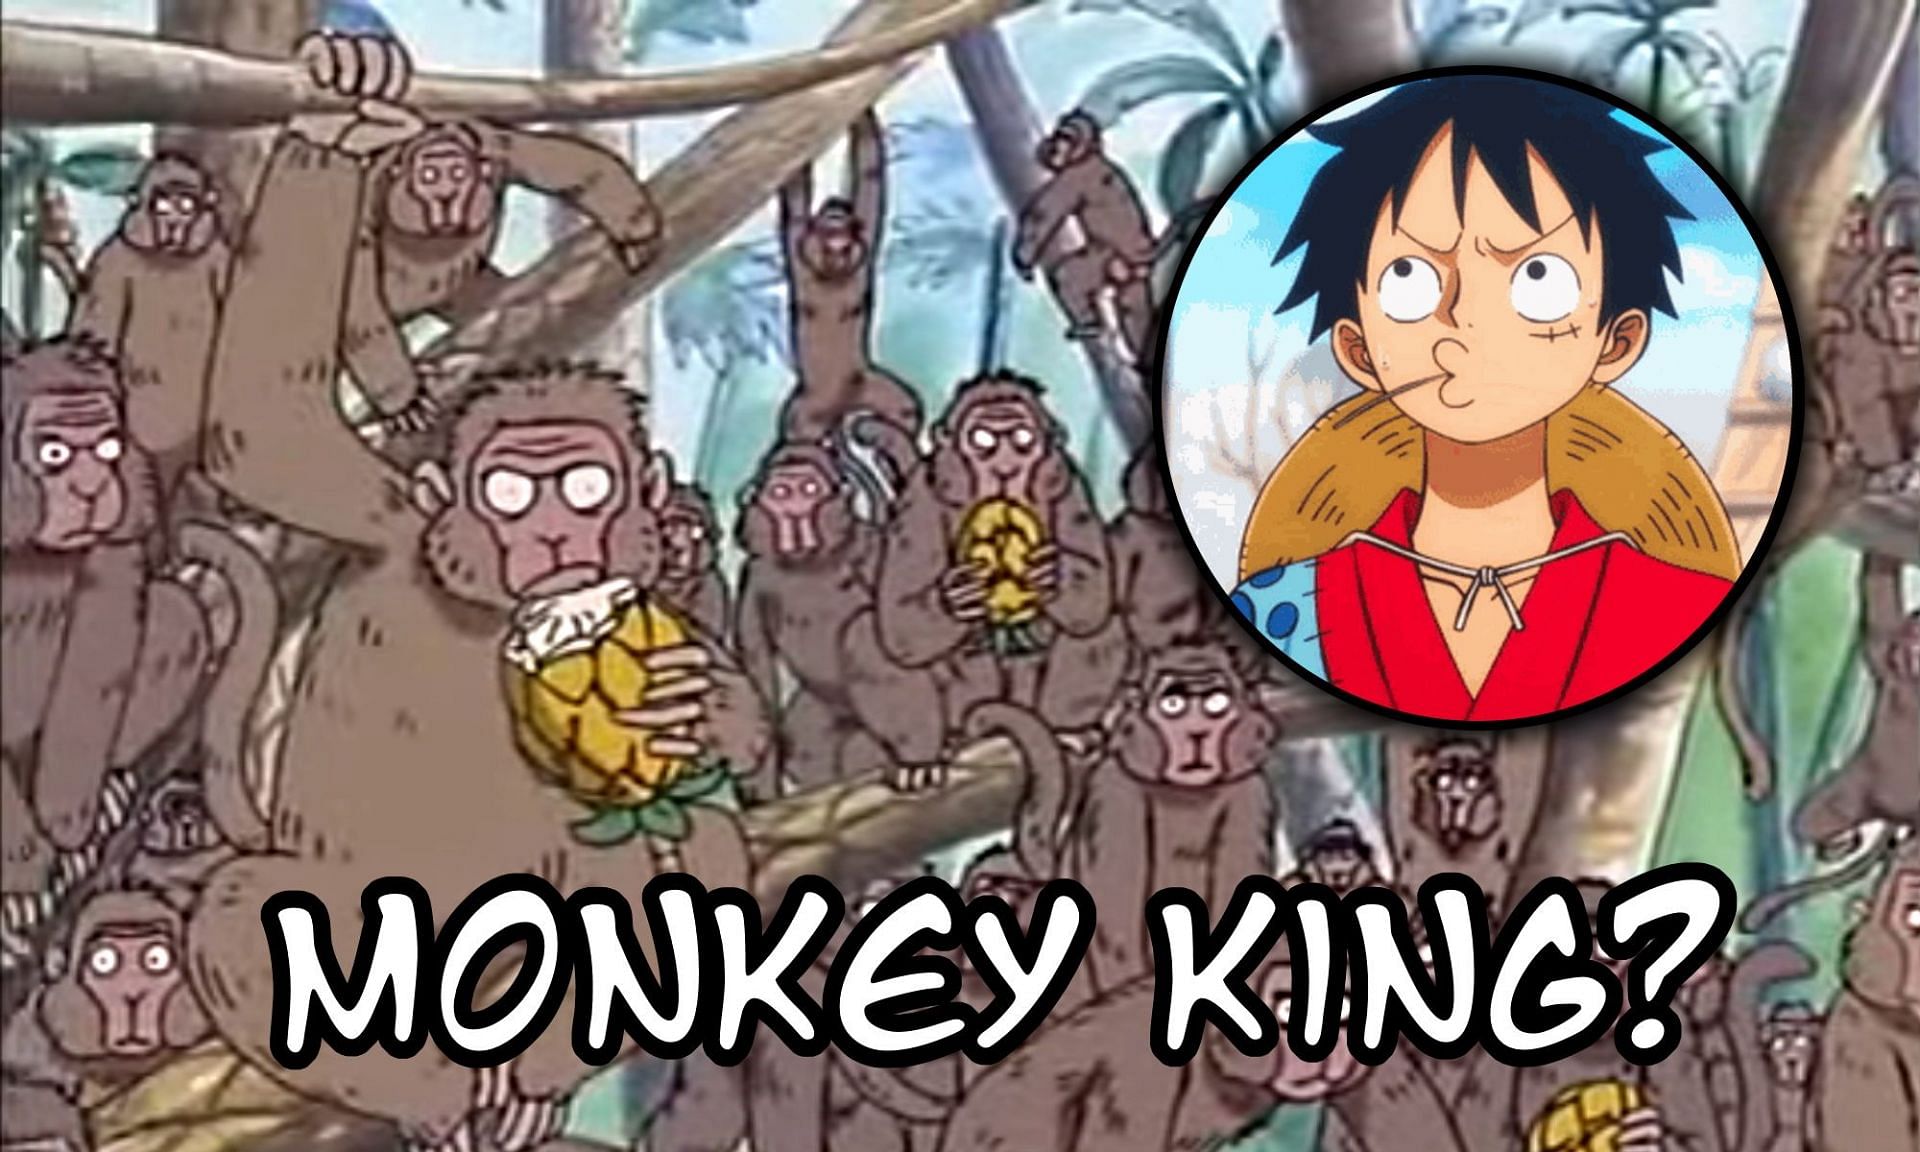 Monkeys are more than just a common ancestor for Luffy (Image via Sportskeeda)